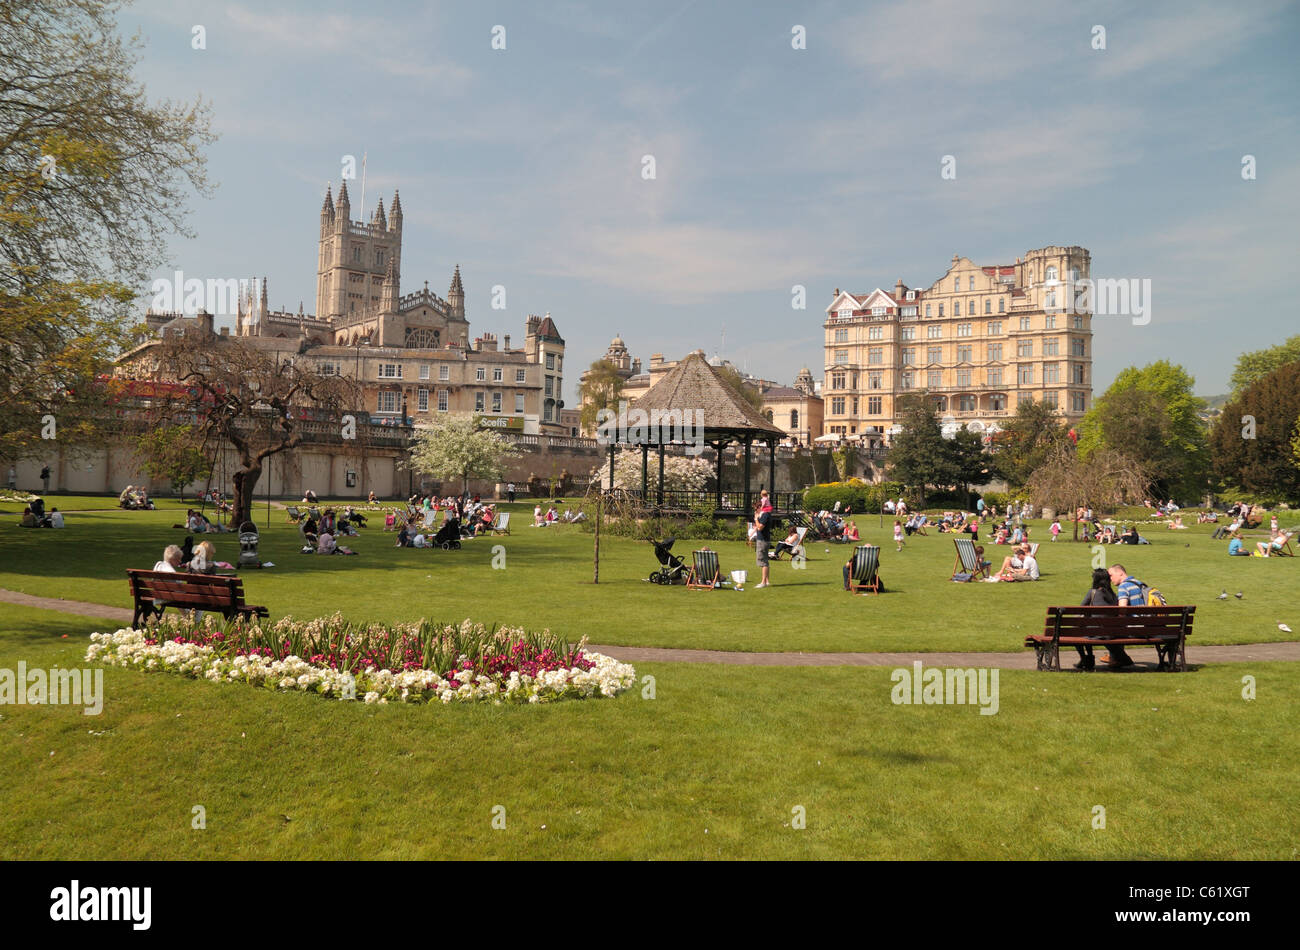 People enjoying the warm spring weather (Apr 2011) in Parade Gardens, Bath, England. Stock Photo